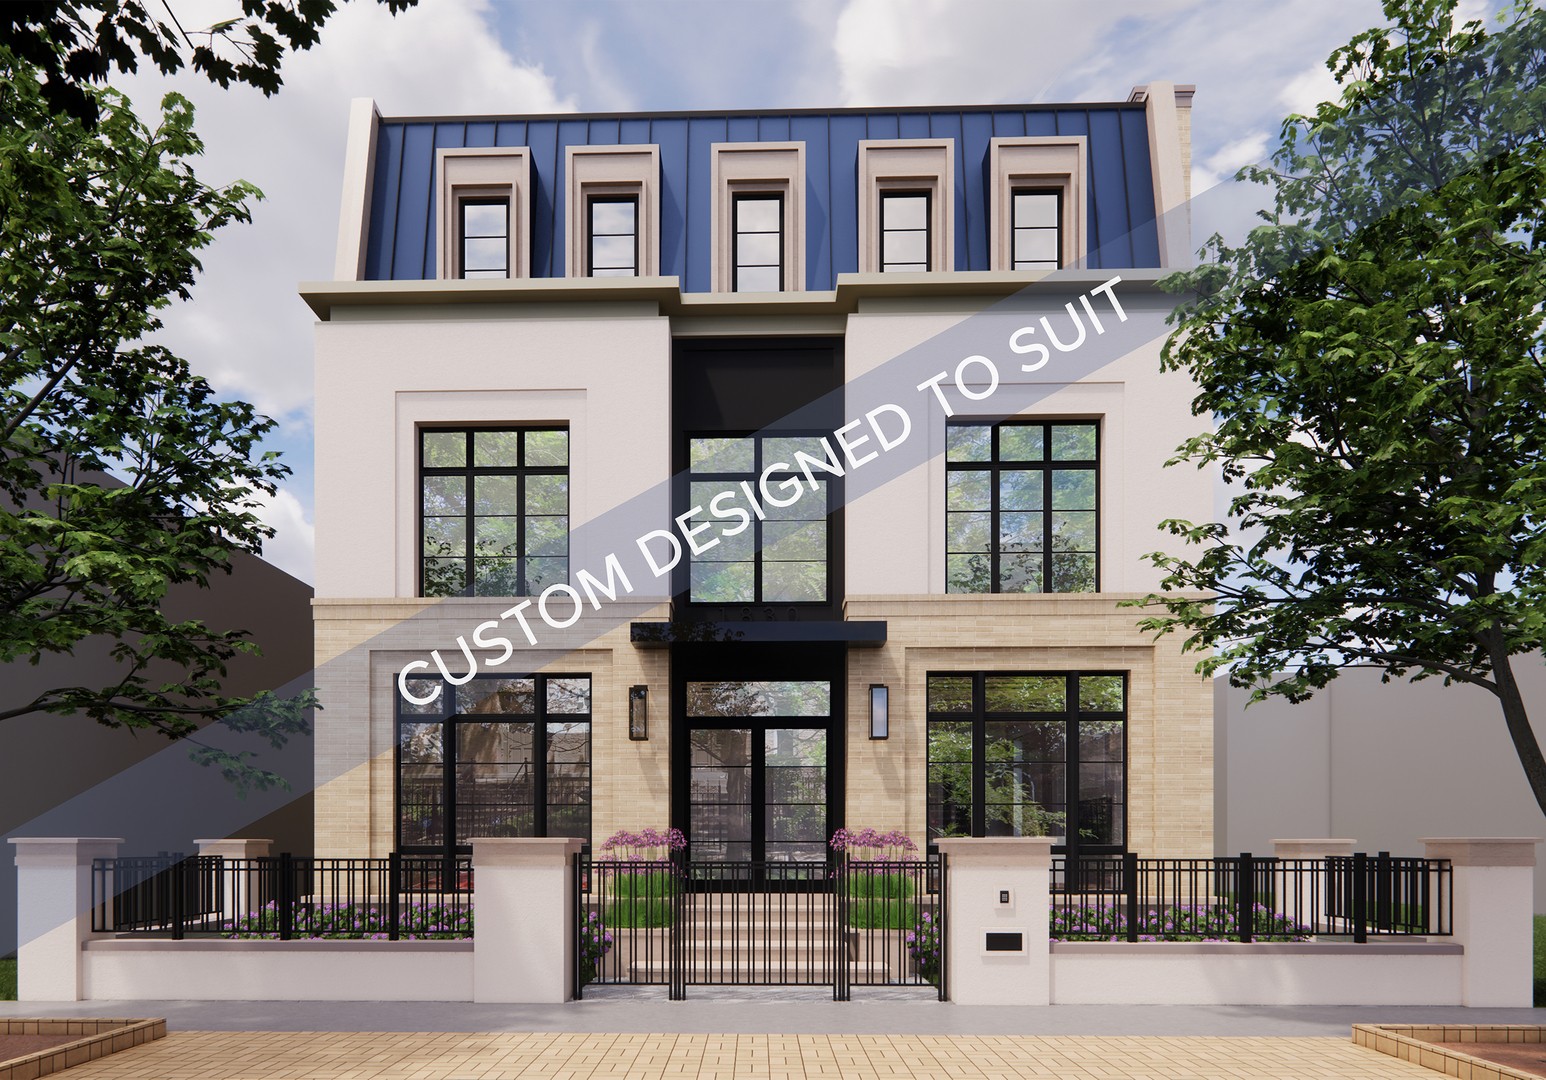 1867 N Burling Street : a Luxury Single Family Home for Sale - Lincoln Park Chicago, Illinois